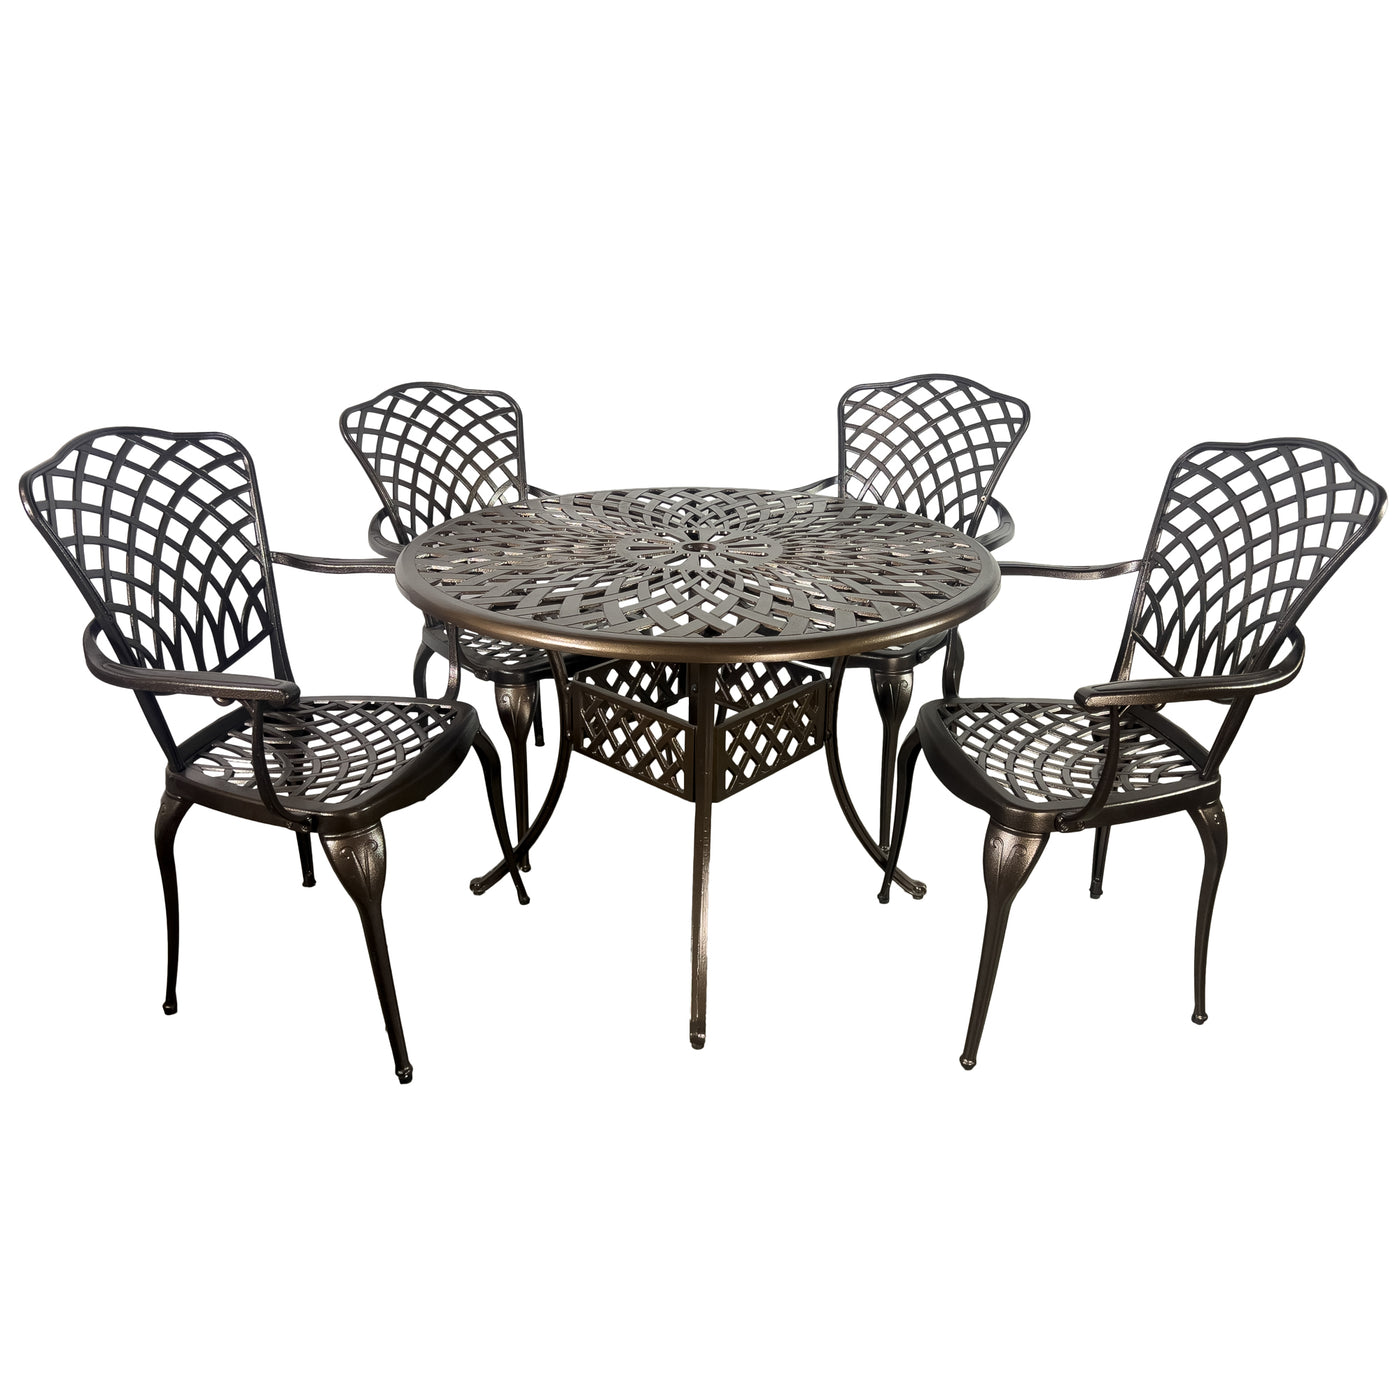 Arden 5-Piece Outdoor Dining Set for Patio